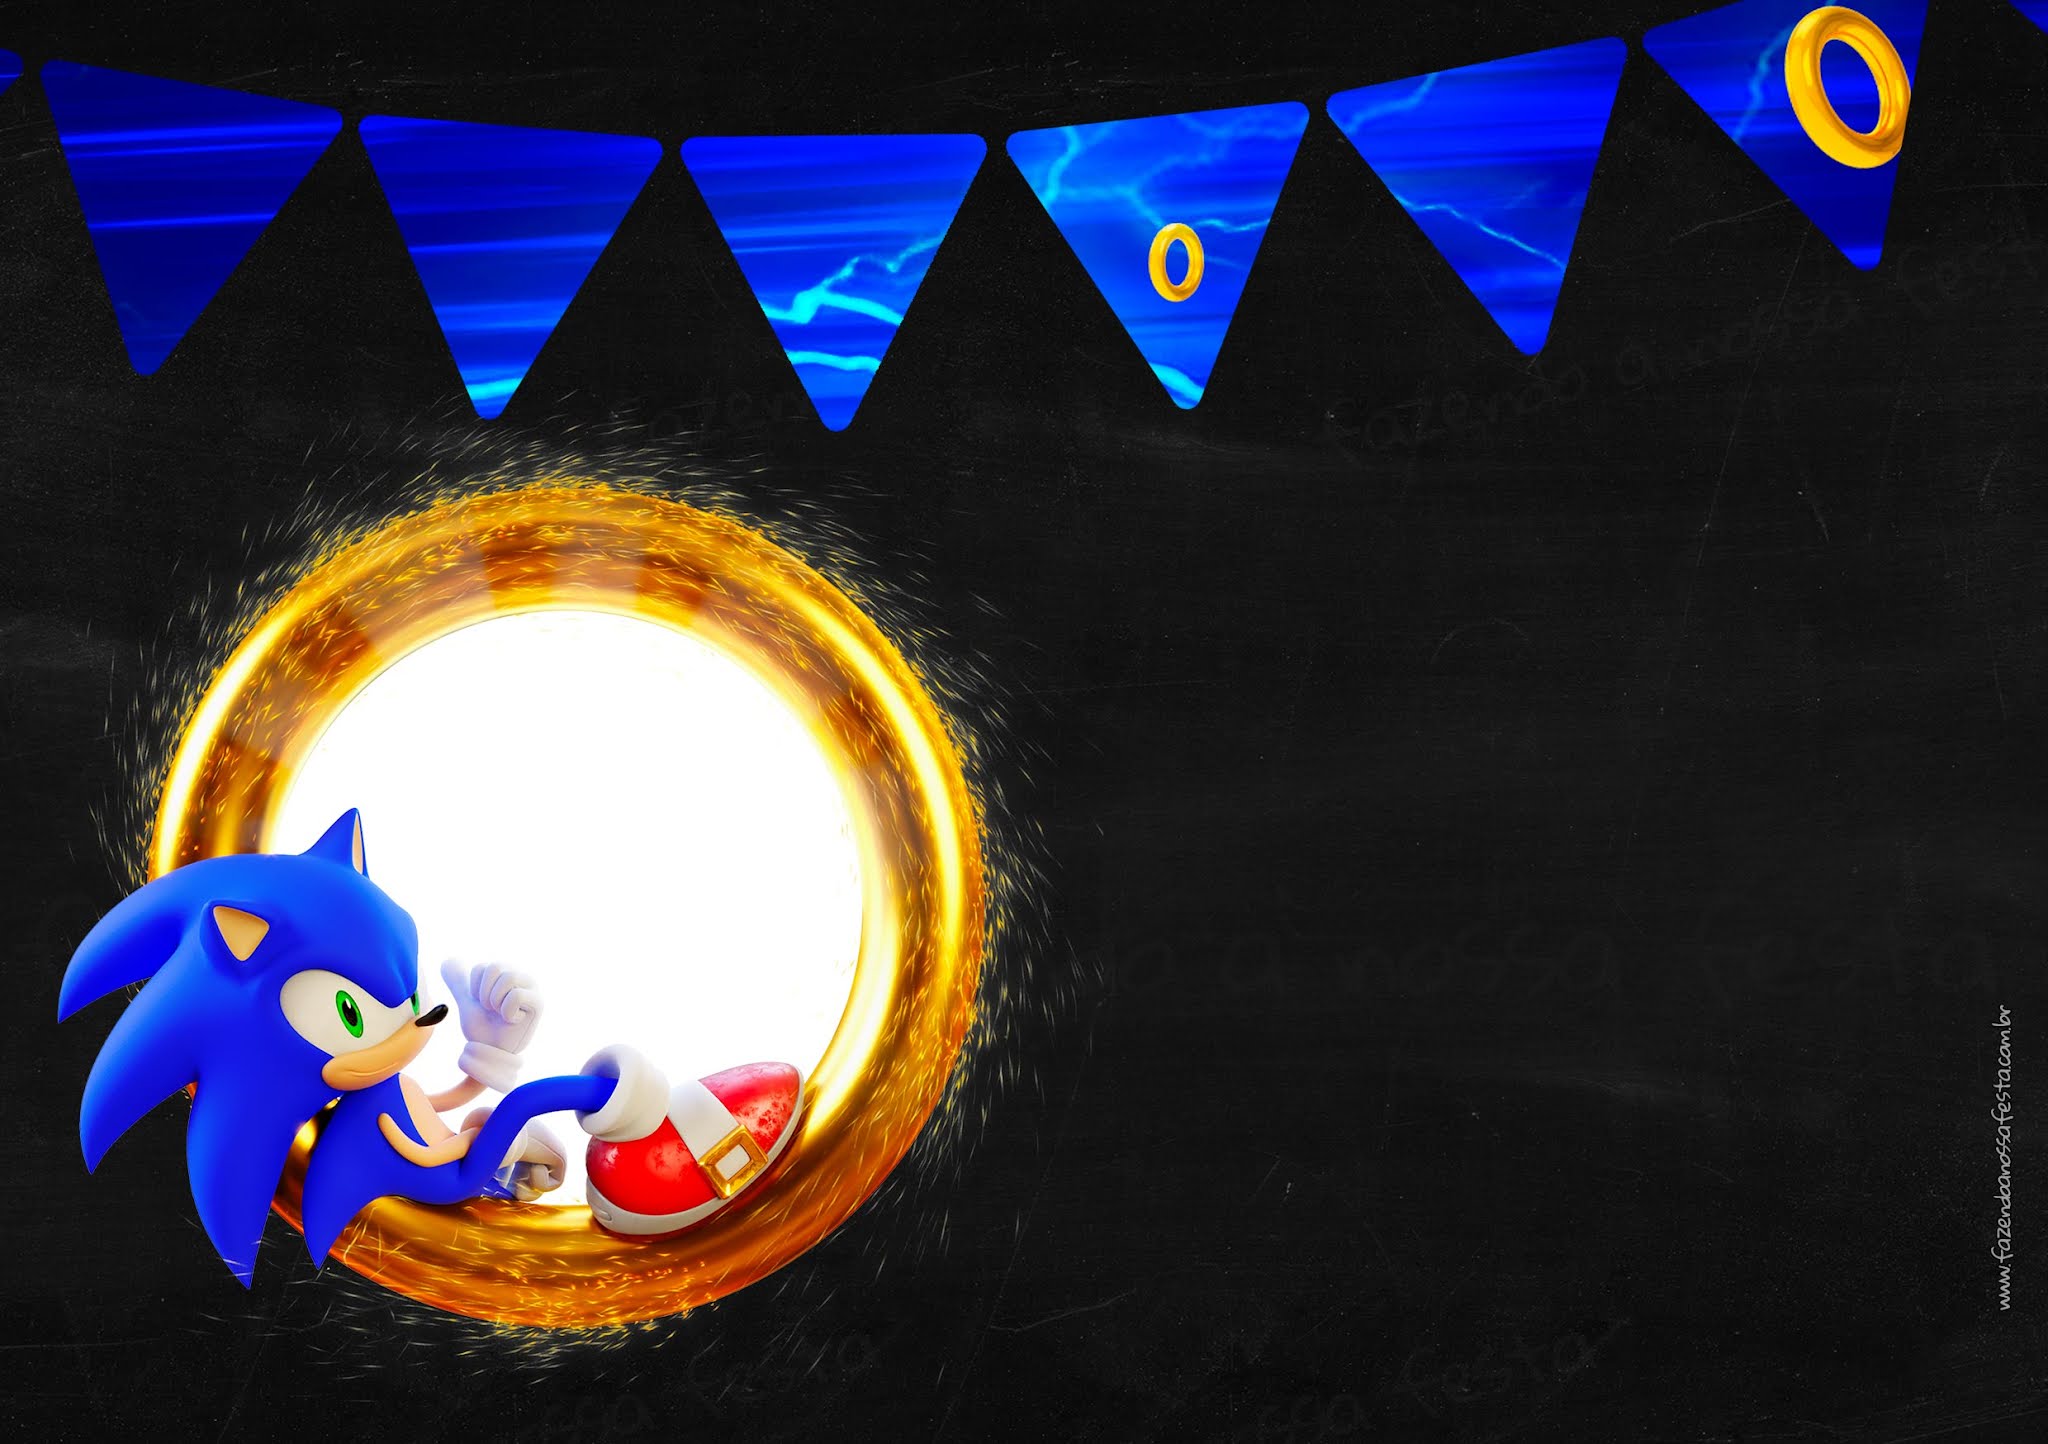 Соник пати. Disco Sonic is partying. Sonic party